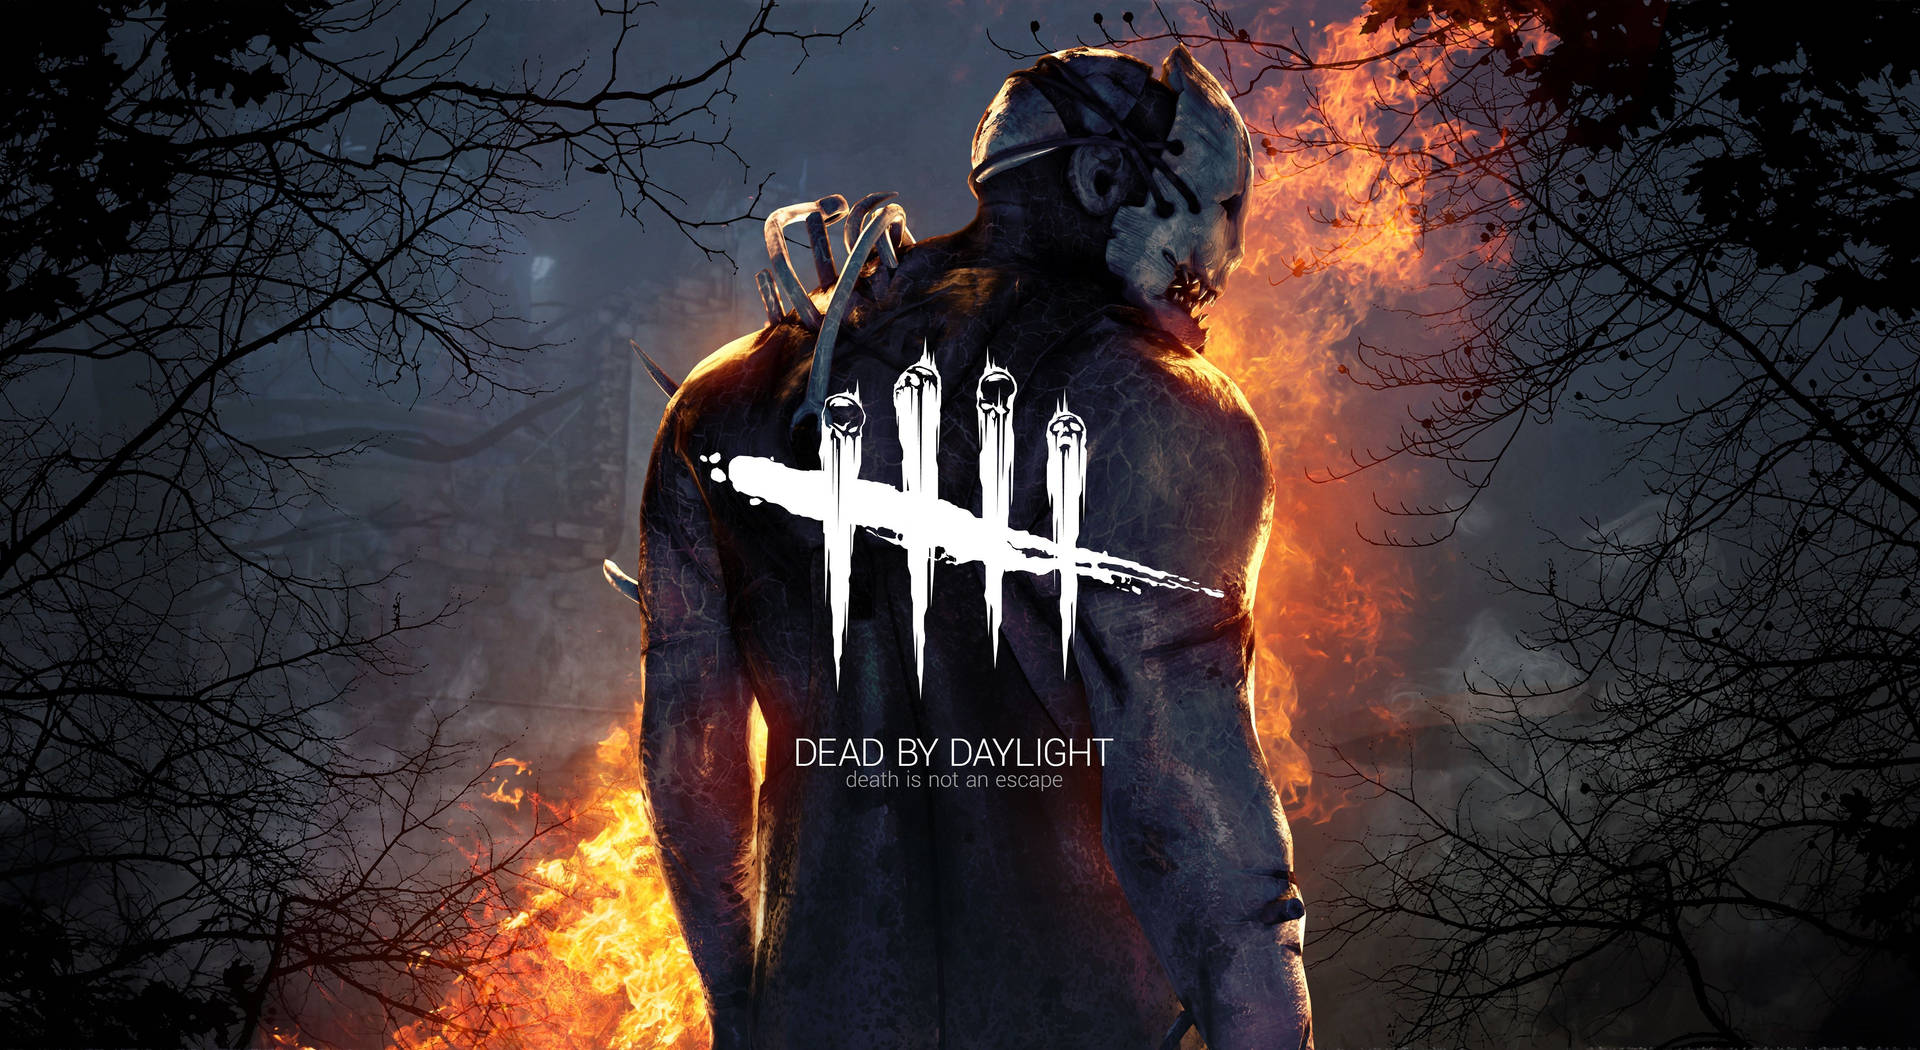 Top 999+ Dead By Daylight Wallpapers Full HD, 4K✅Free to Use